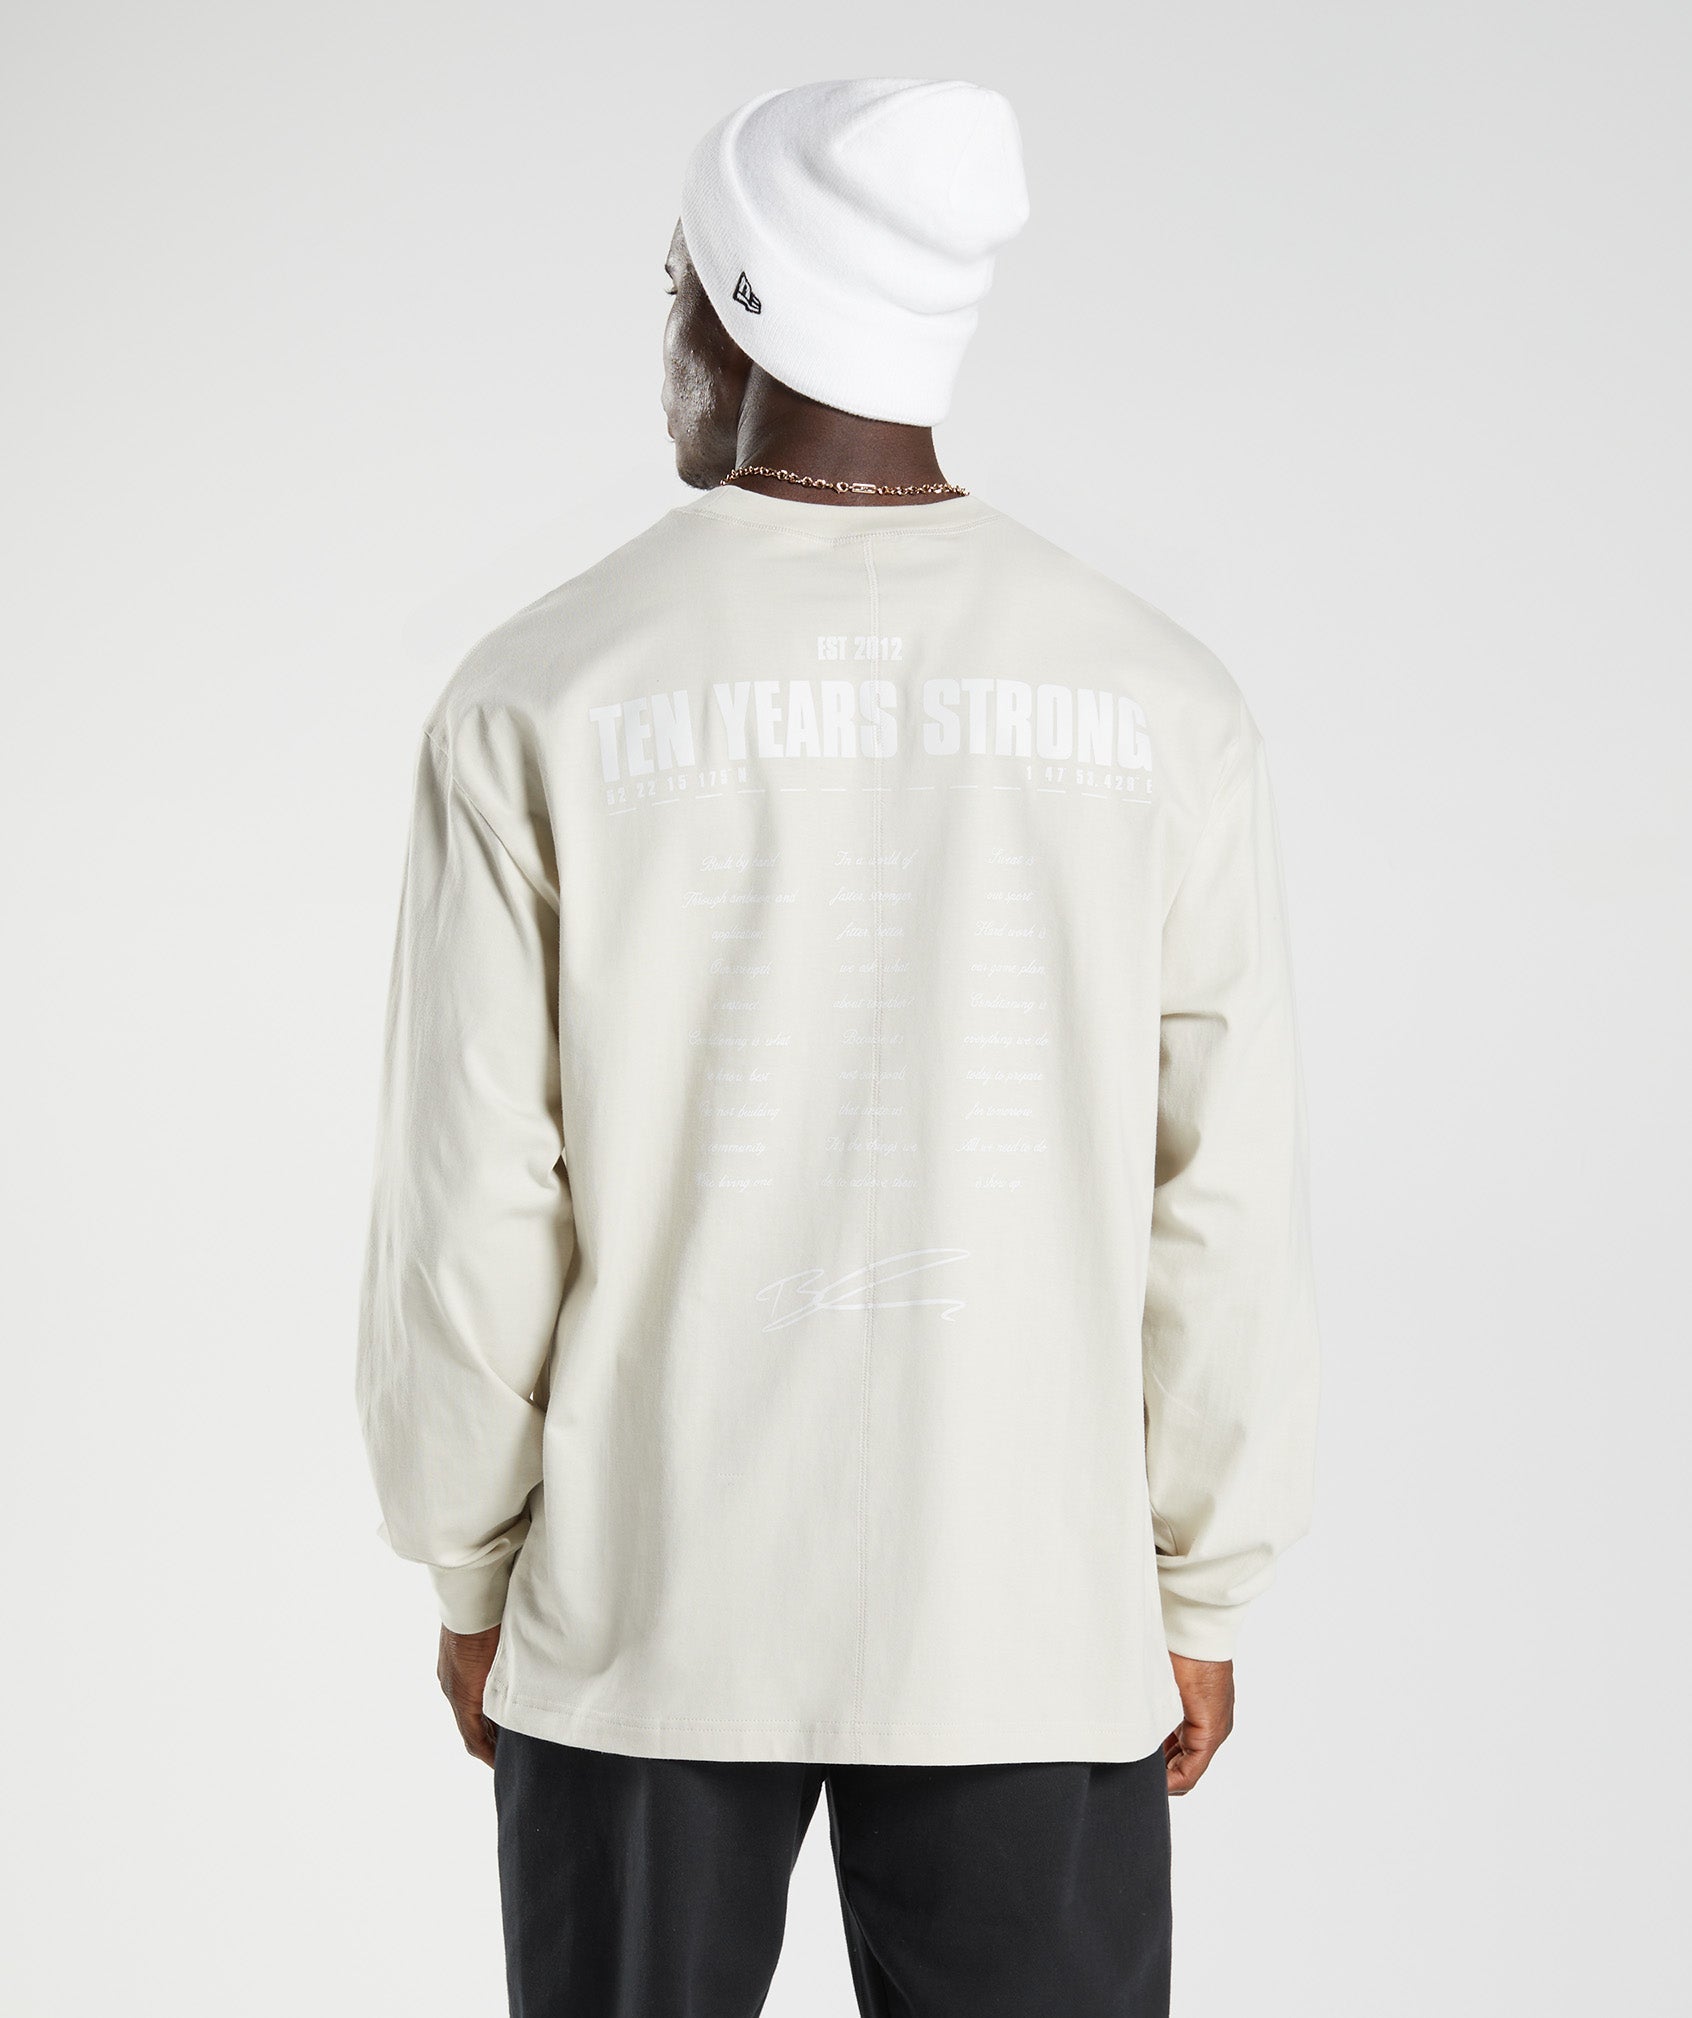 GS10 Year Oversized Long Sleeve T-Shirt in Chalky Grey - view 2